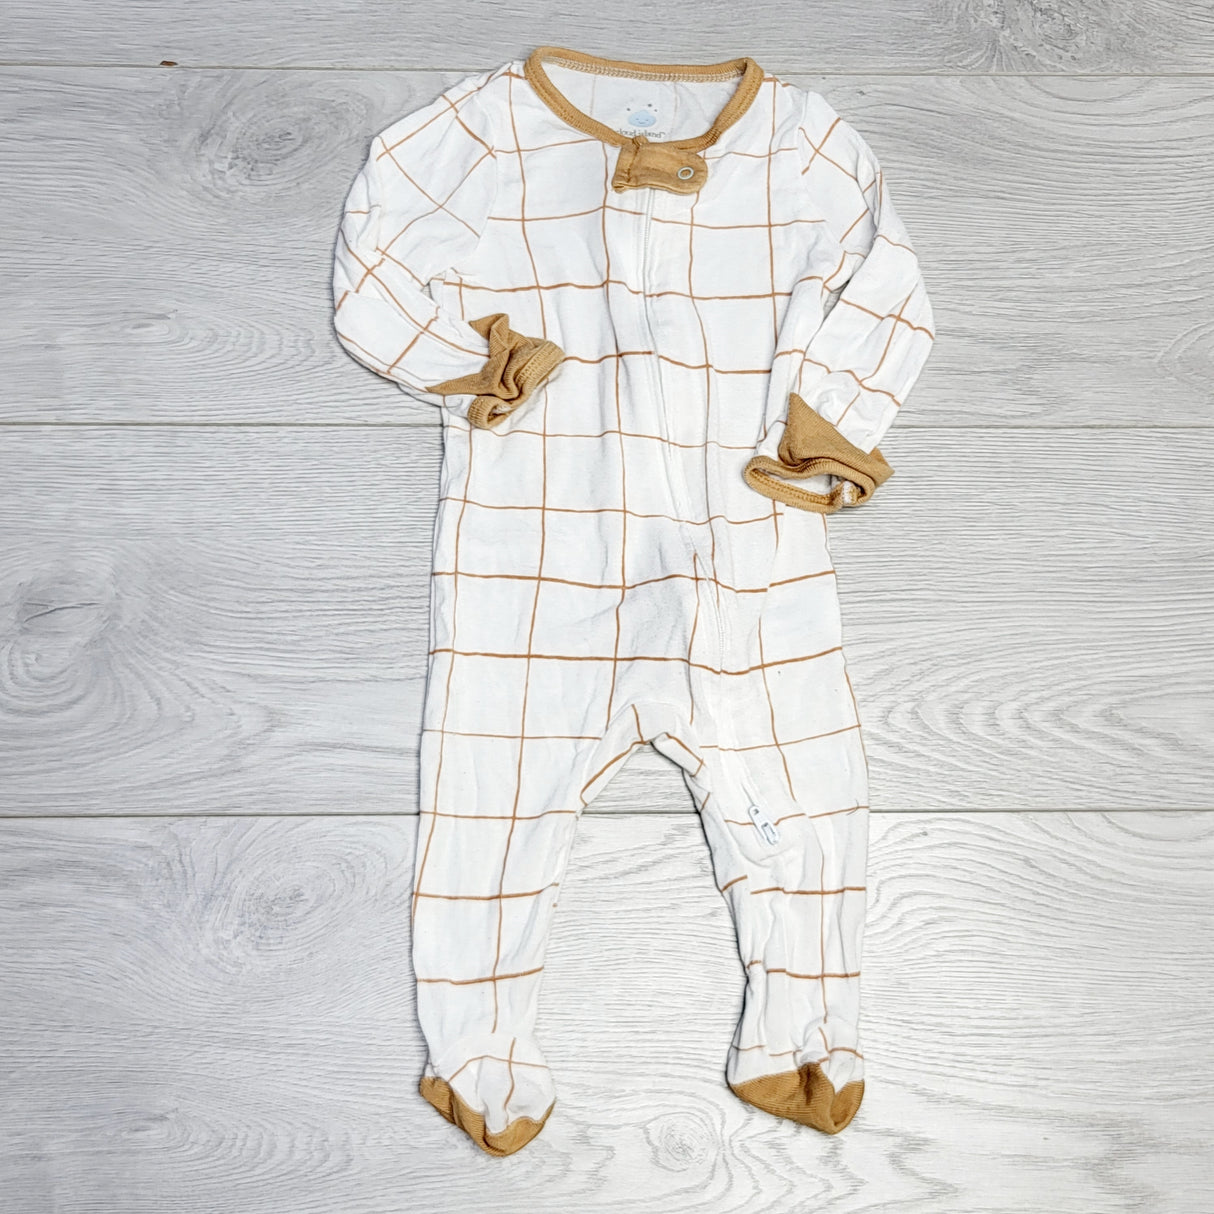 CRTH1 - Cloud B checked zippered rayon romper. Size 0-3 months